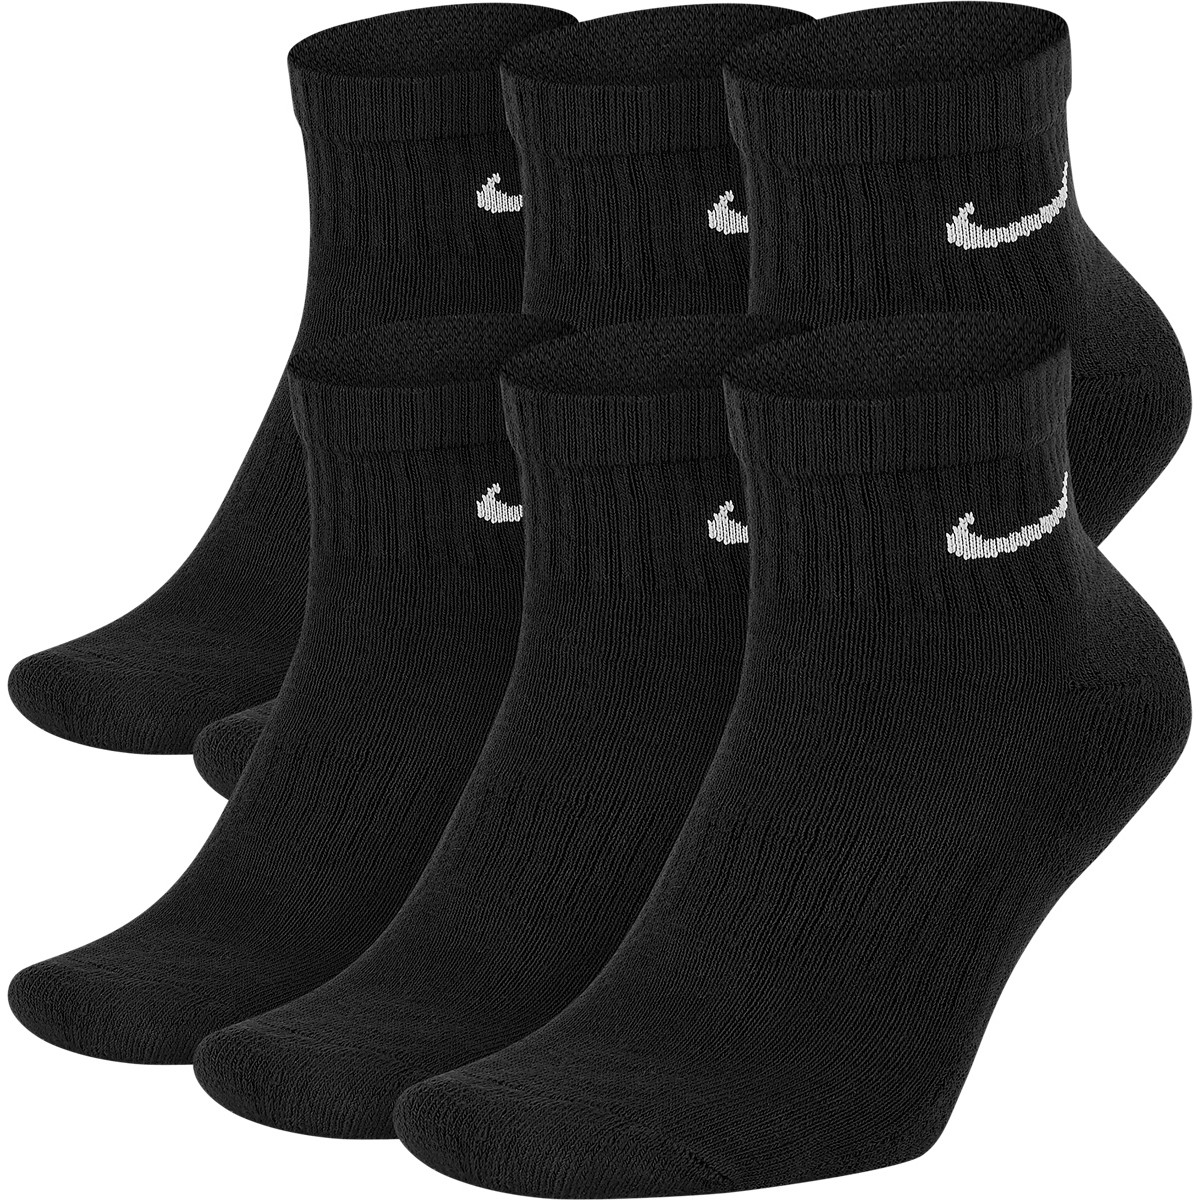 6 PARES CALCETINES NIKE CUSHIONED ANKLE - NIKE - Hombre - Ropa | Tennispro